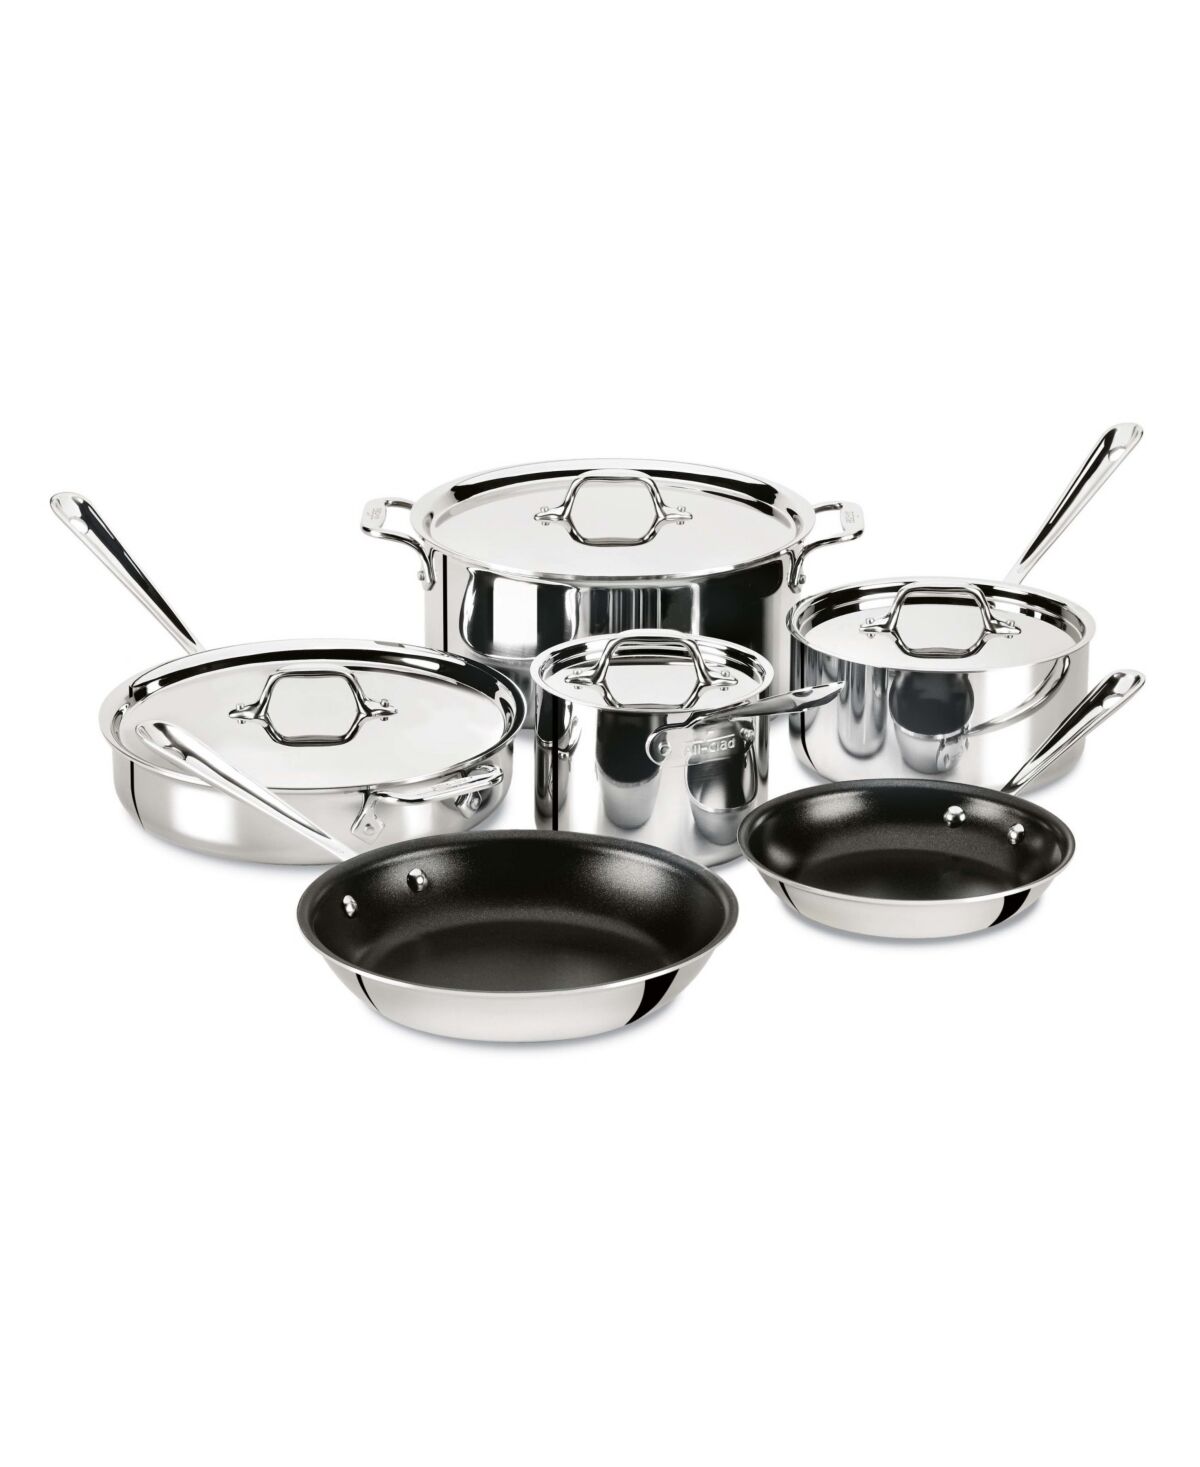 All-clad All Clad D3 Stainless 3-ply Bonded Cookware Set, Nonstick 10 piece